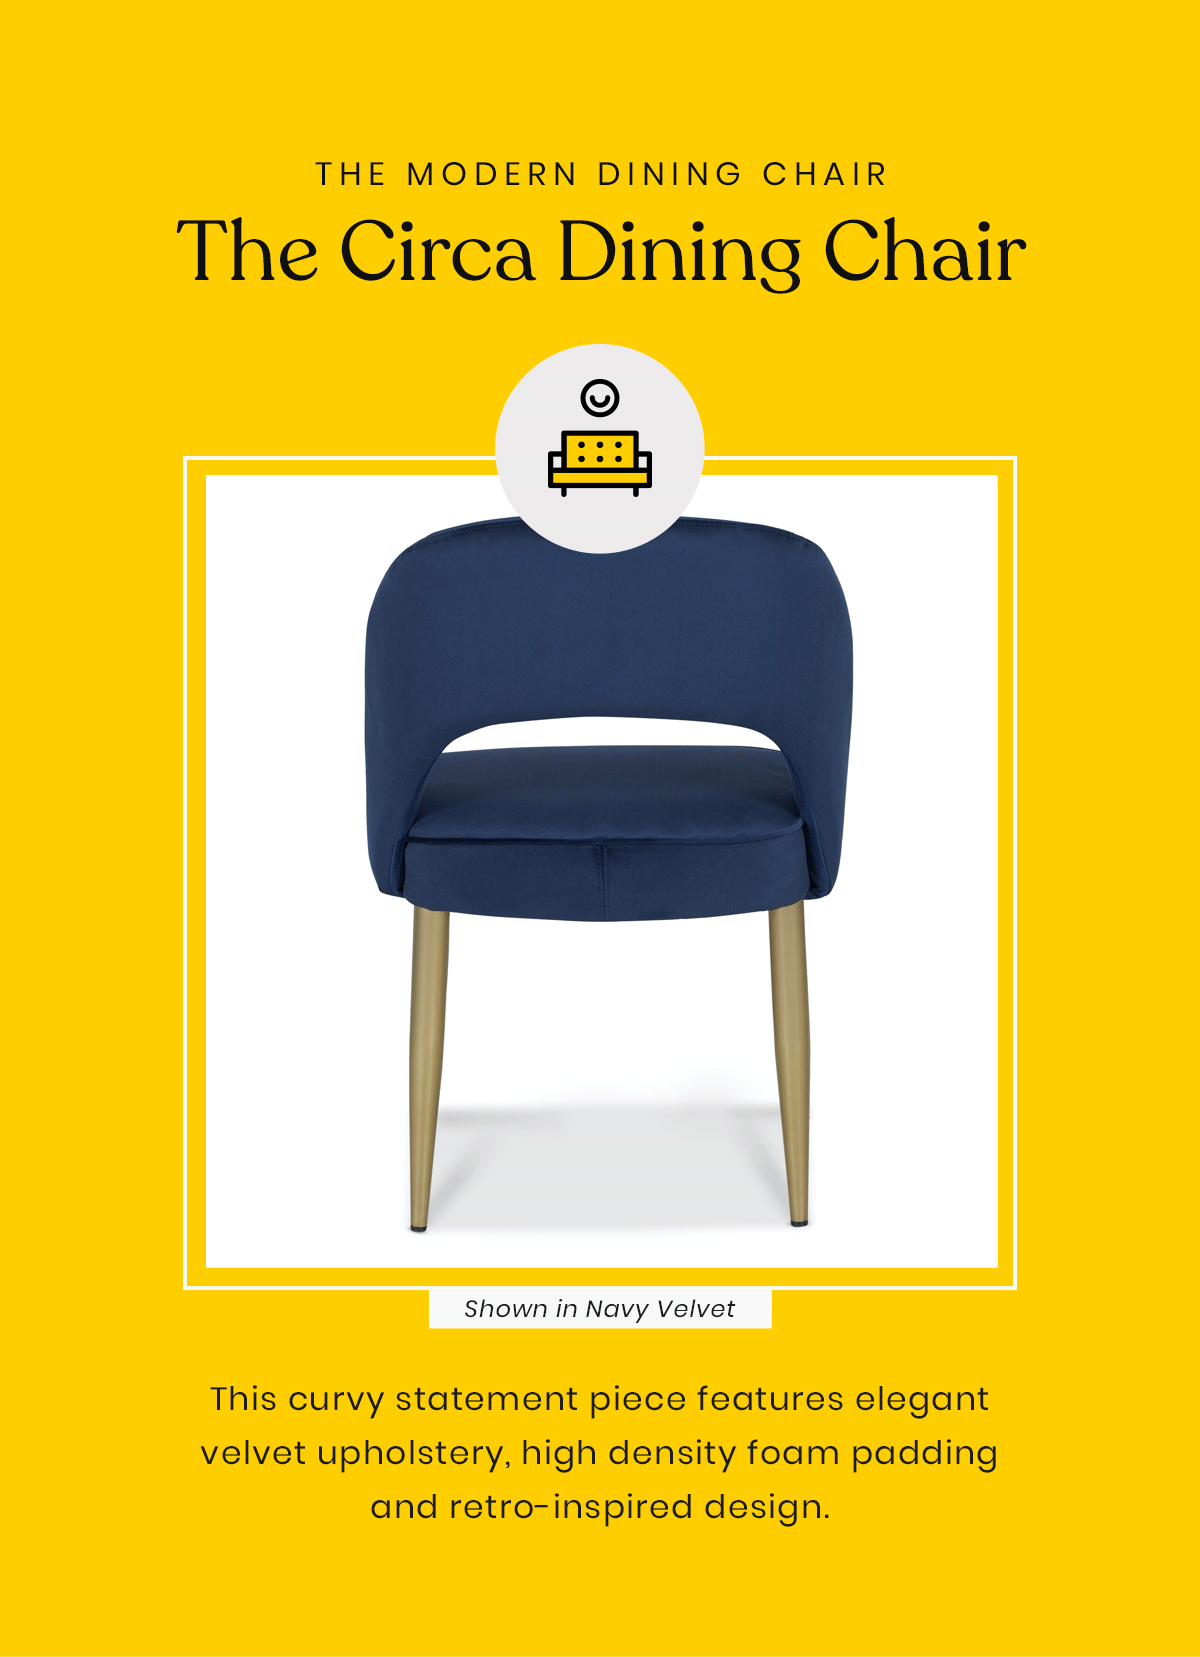 The Circa Dining Chair | This curvy statement piece features elegant velvet upholstery, high density foam padding and retro-inspired design.